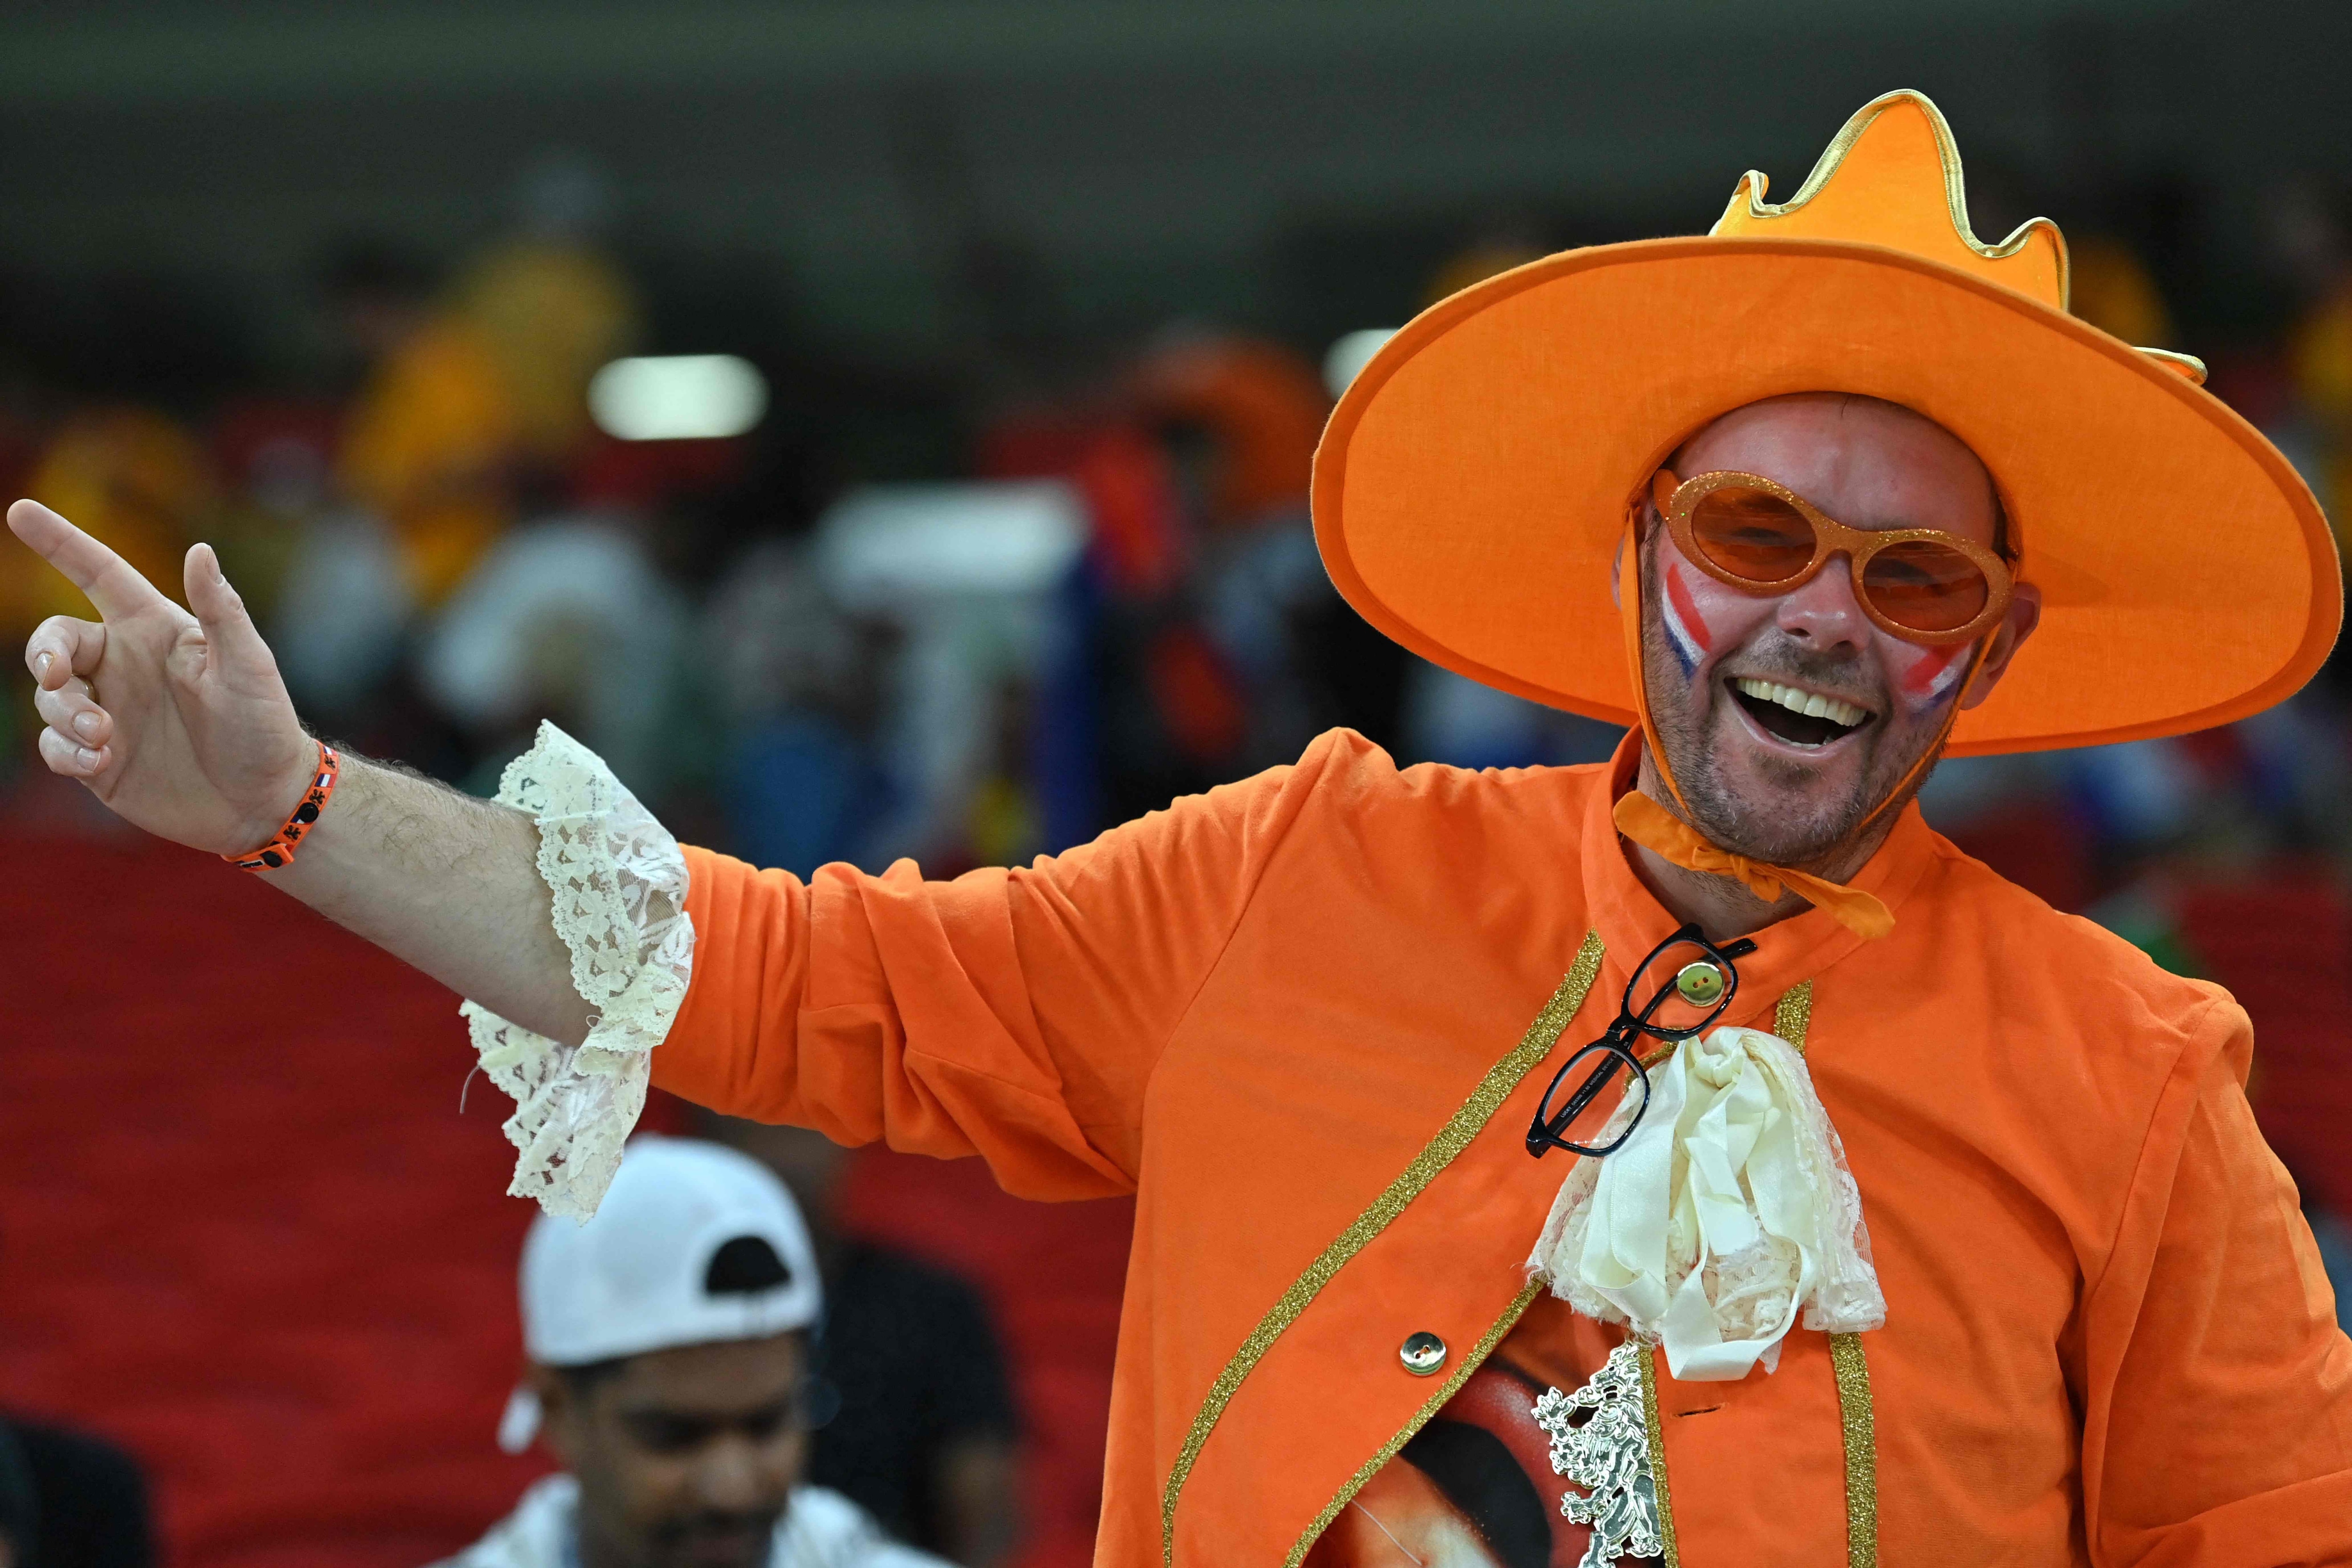 A Netherlands' supporter takes their seat for the Qatar 2022 World Cup Group A football match between Senegal and the Netherlands at the Al-Thumama Stadium in Doha on November 21, 2022. (Photo by Glyn KIRK / AFP)